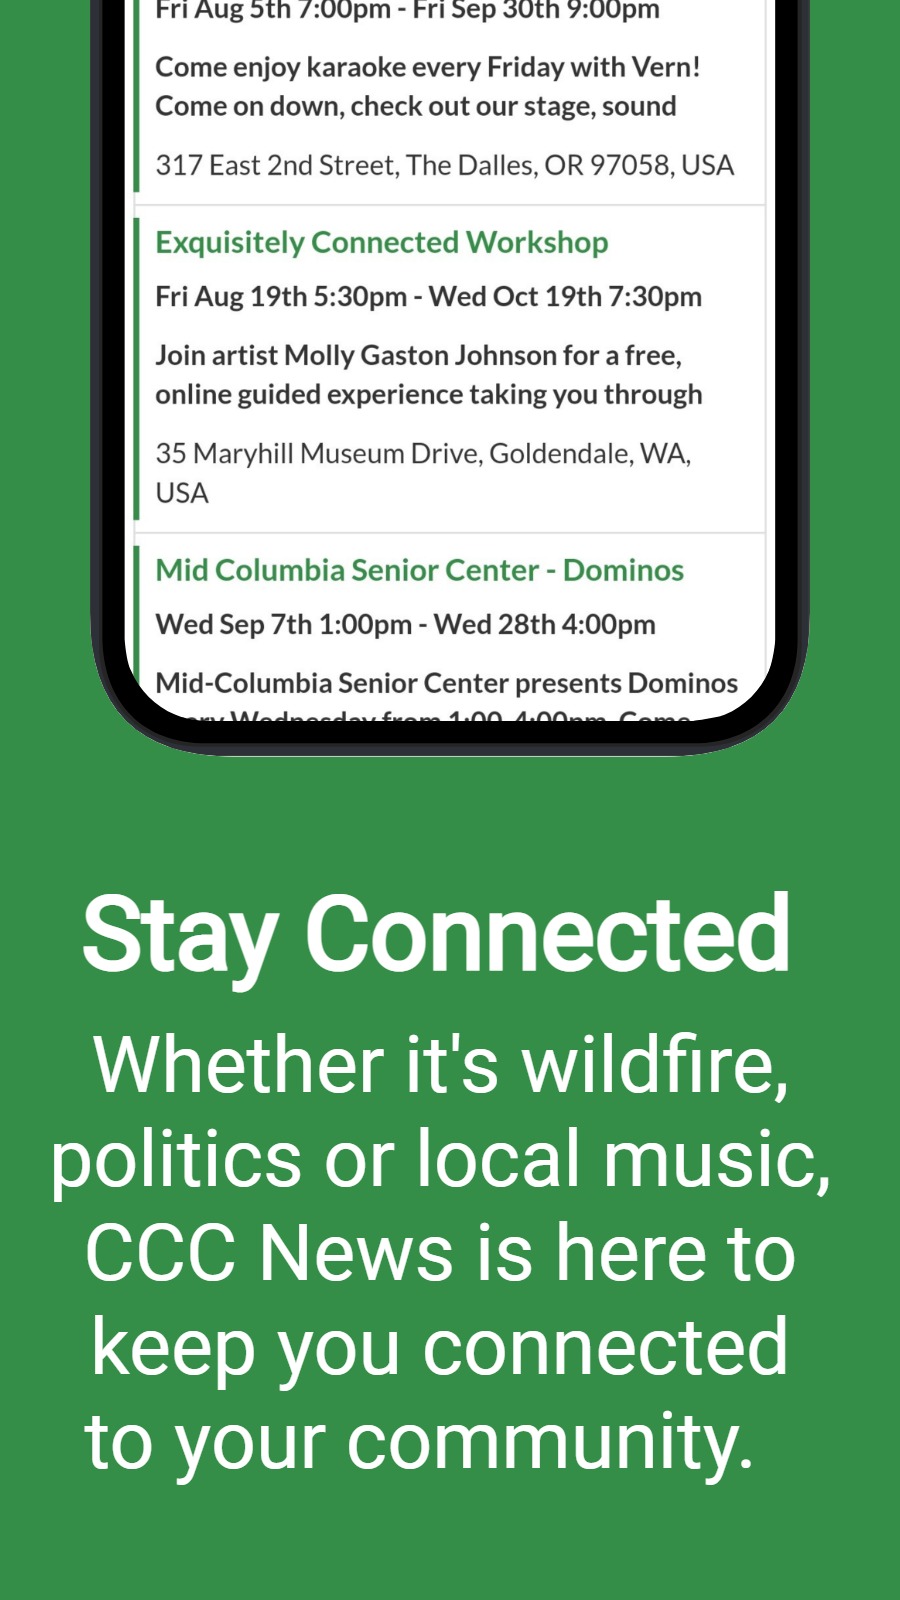 Stay Connected - Whether it's wildfire, politics or local music, CCC News is here to keep you connected to your community.  